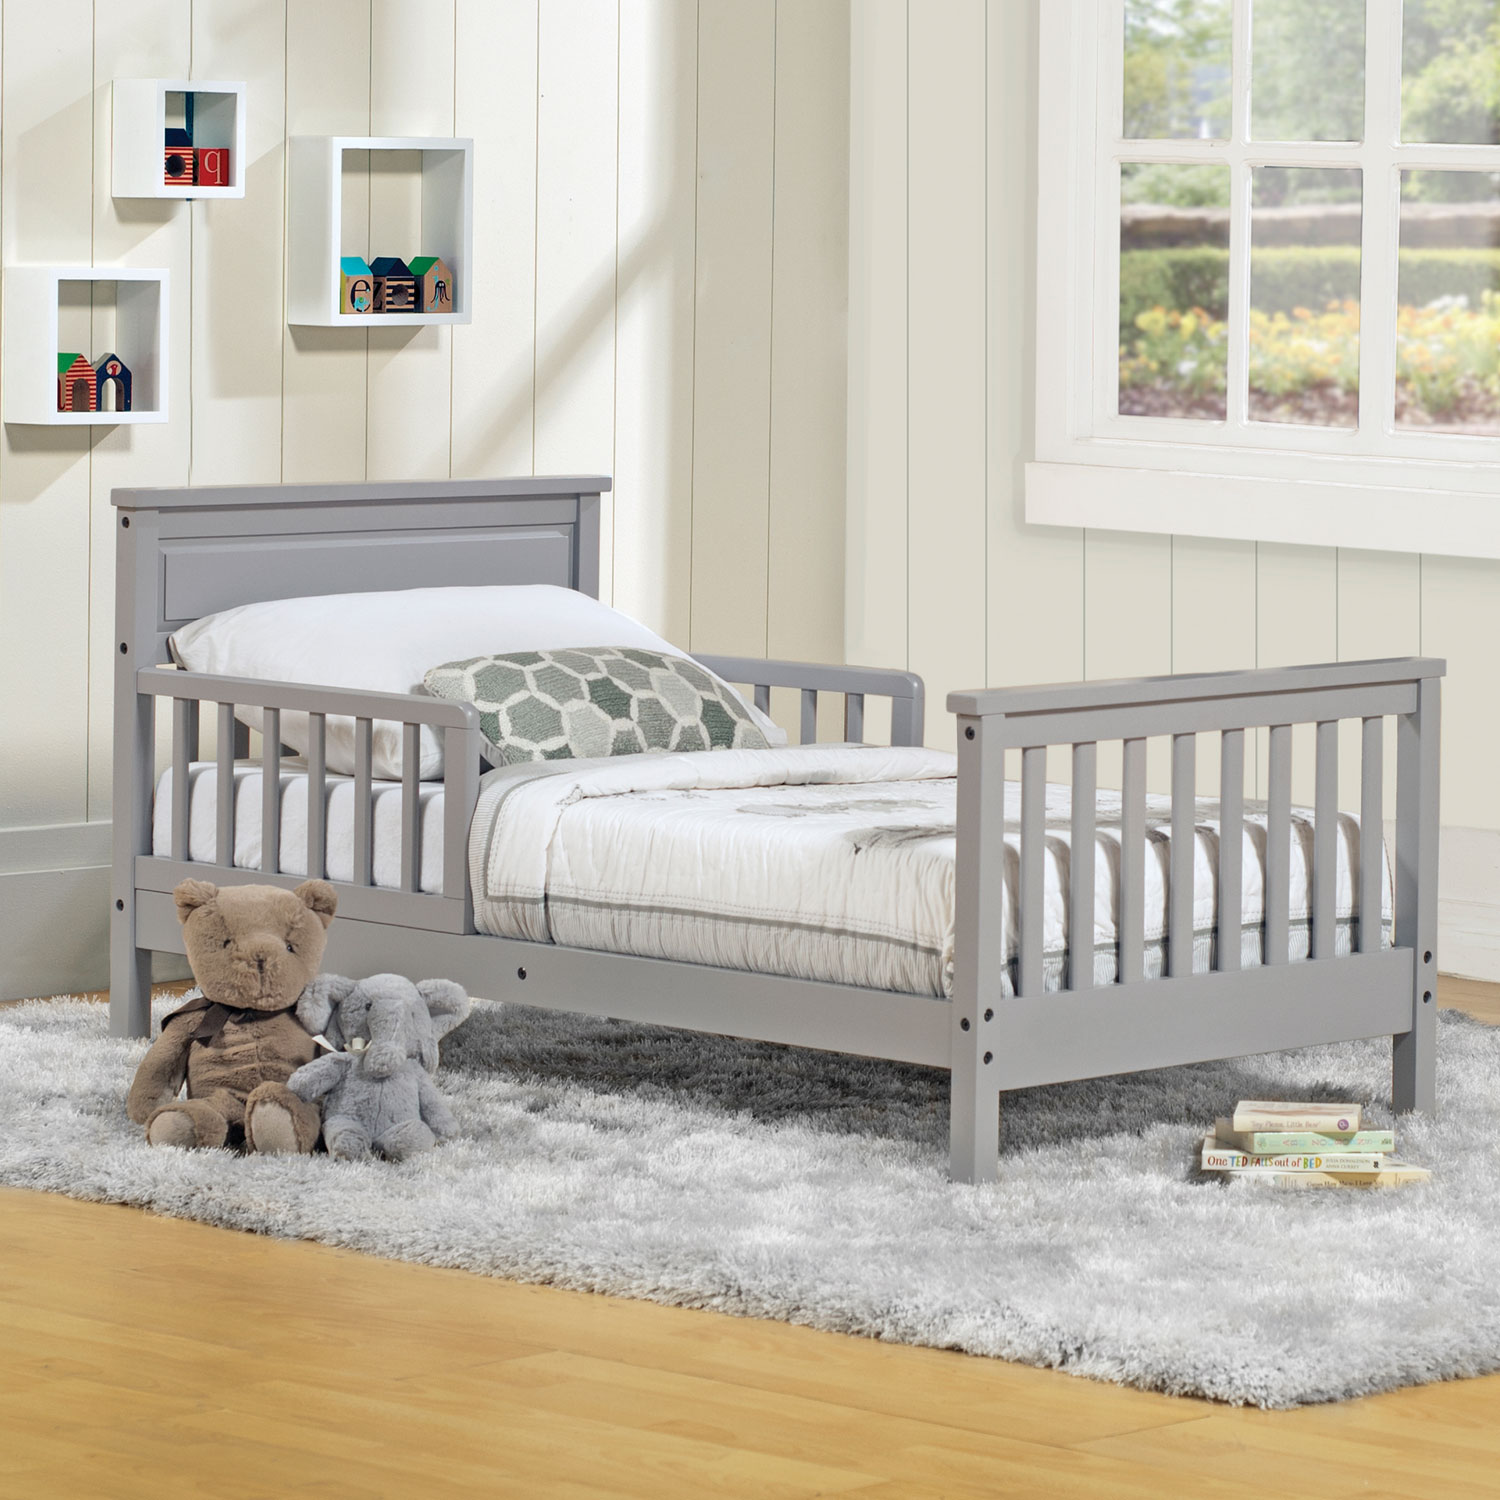 toddler beds - baby relax haven toddler bed